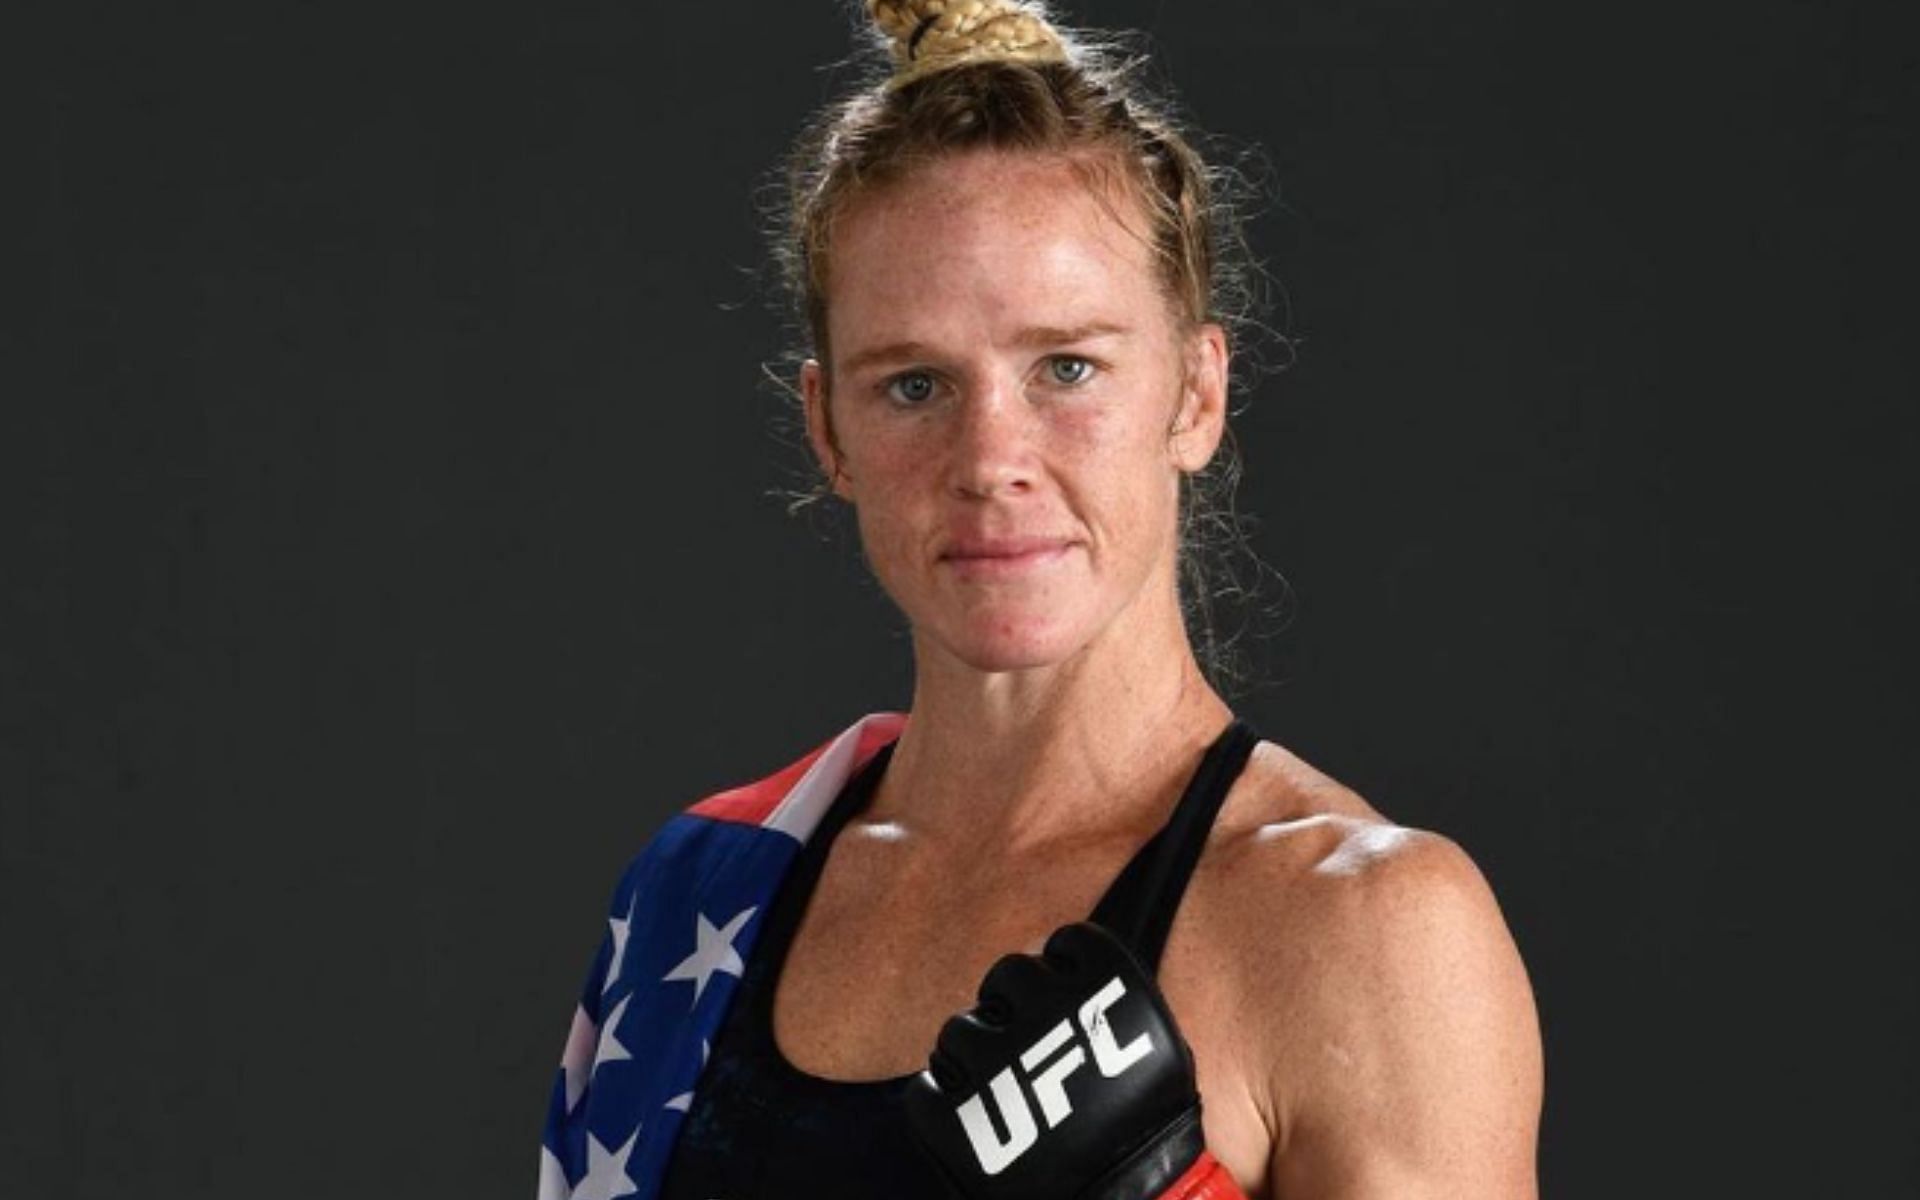 How long was Holly Holm a UFC champion? [Image courtesy of @hollyholm on Instagram]